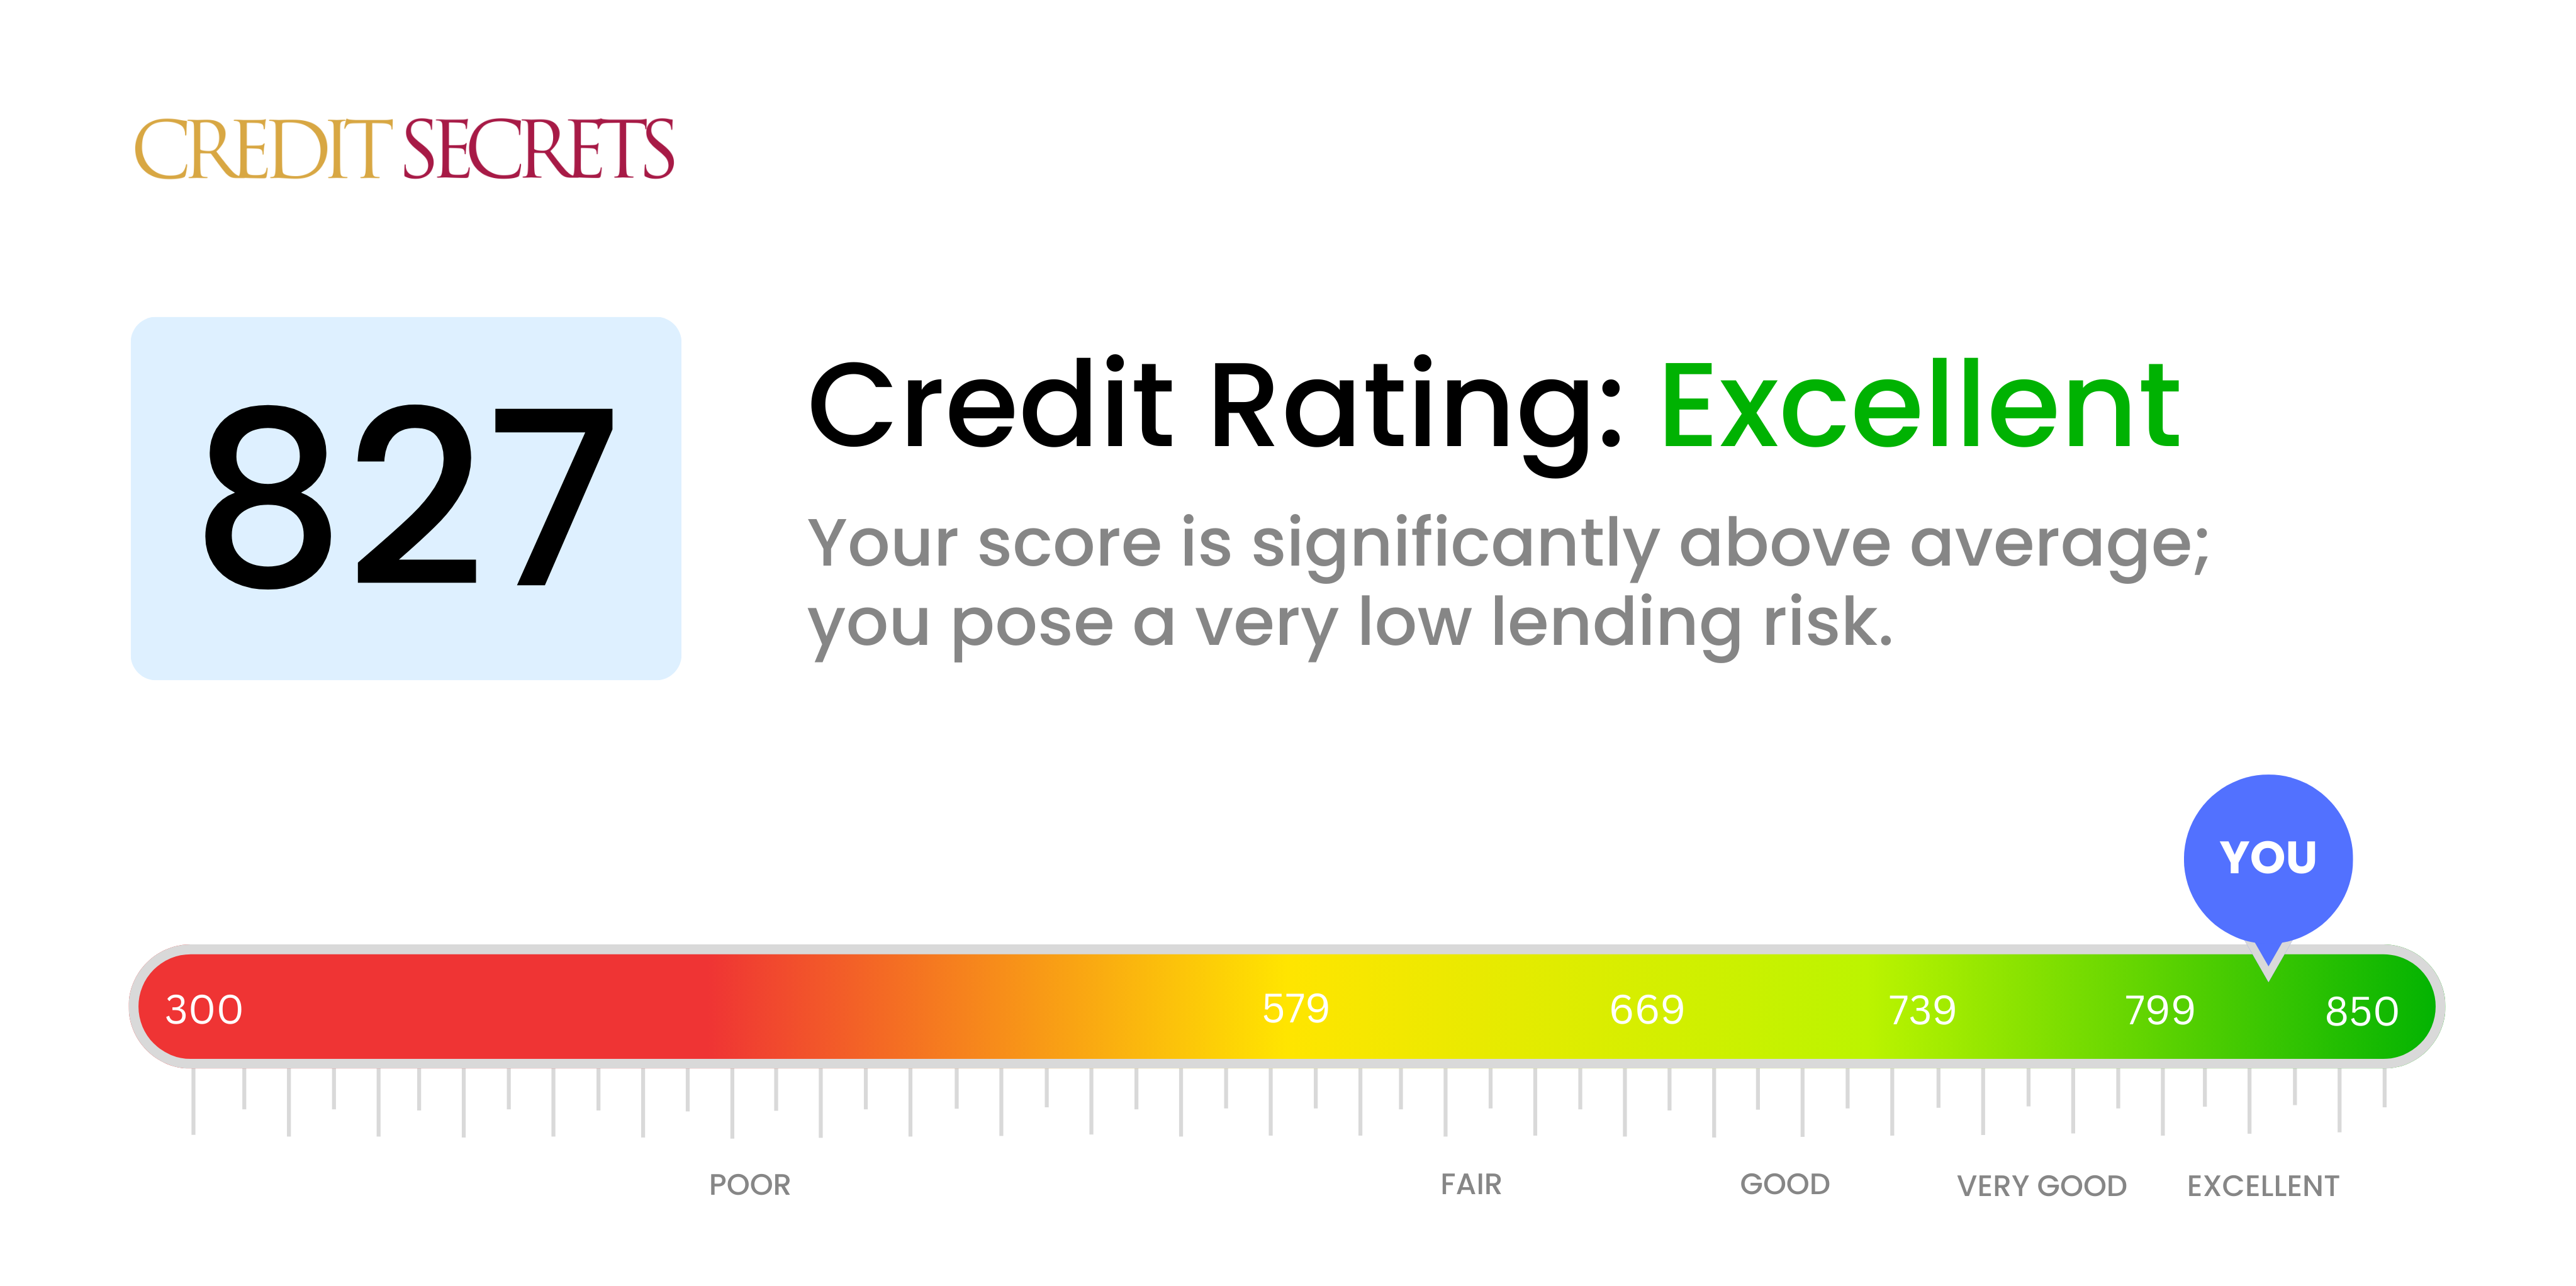 Is 827 a good credit score?